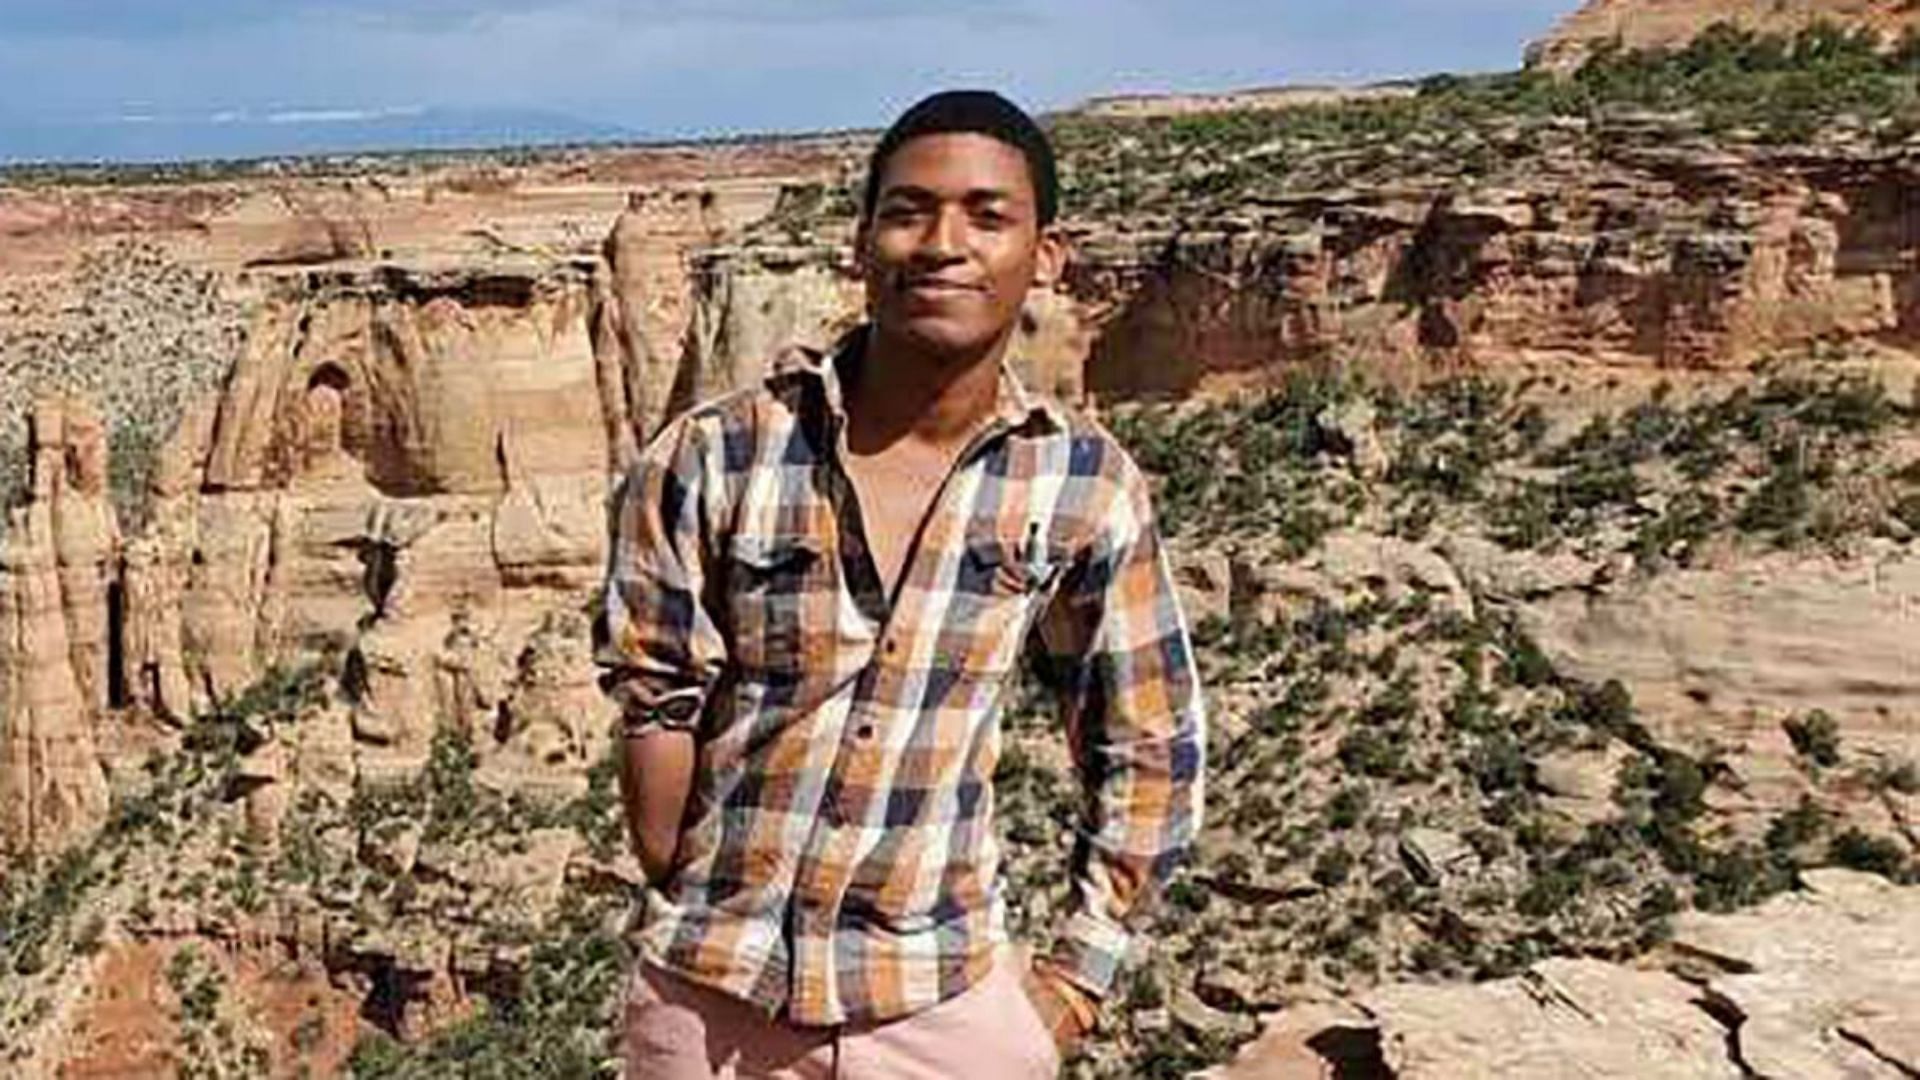 Daniel Robinson disappeared from his worksite in Arizona a year ago, never to be found again (Image via CNN)